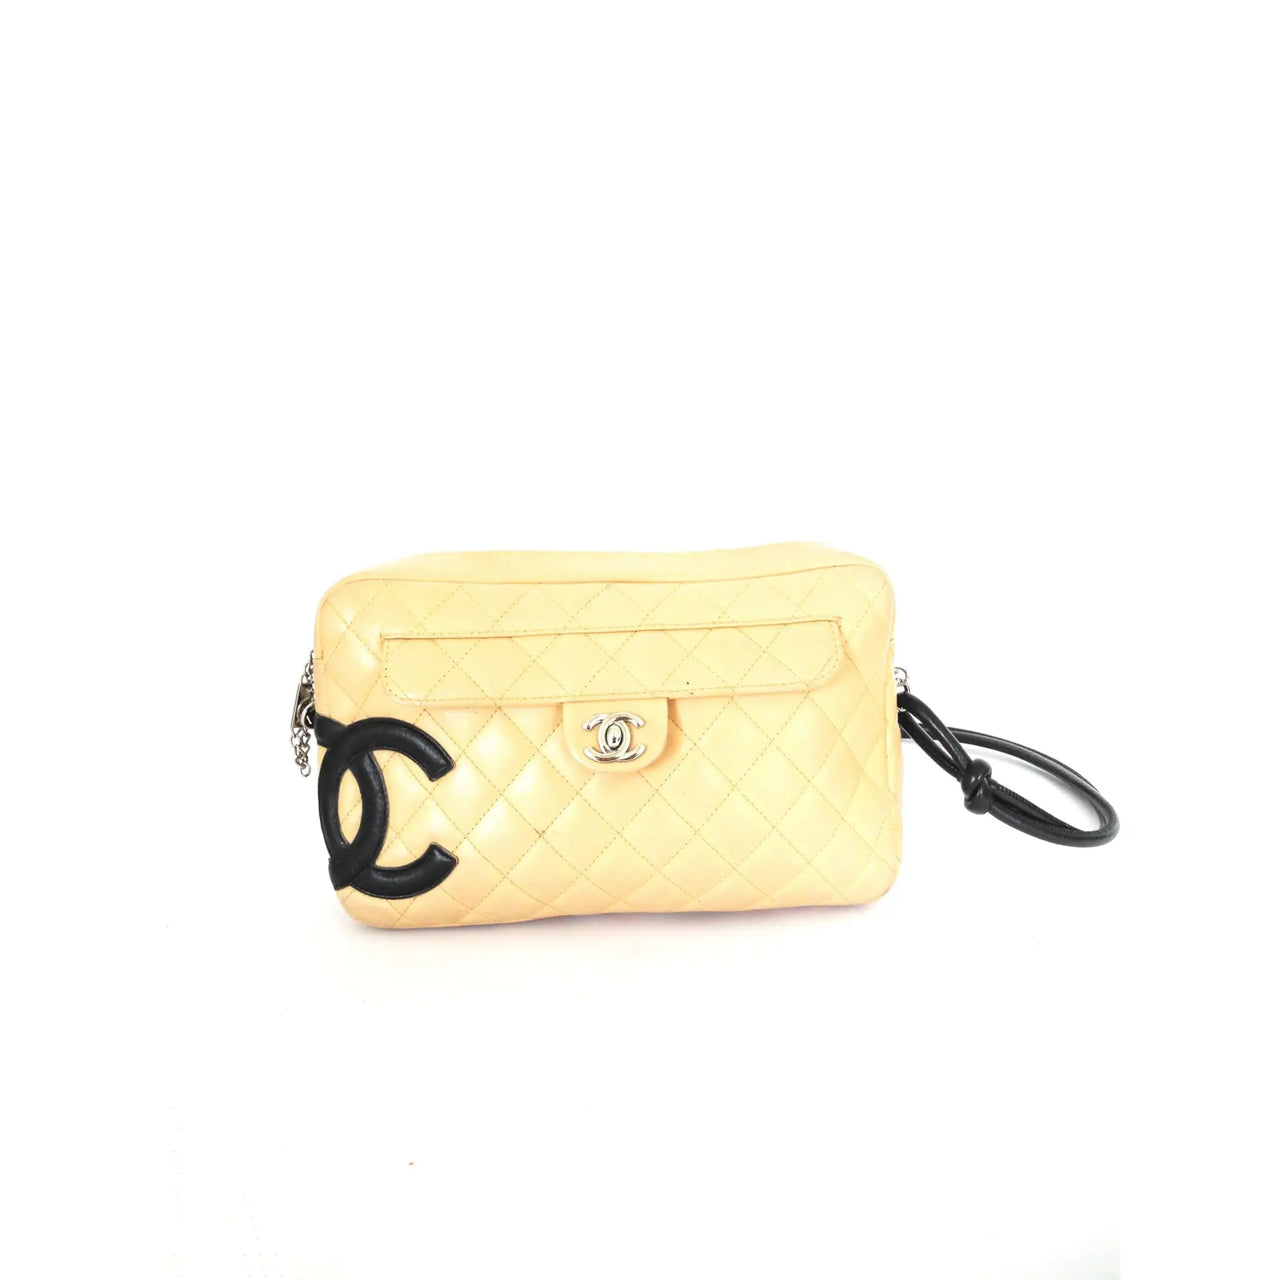 Chanel Cambon Bowler Bag Quilted Leather Medium Neutral  eBay